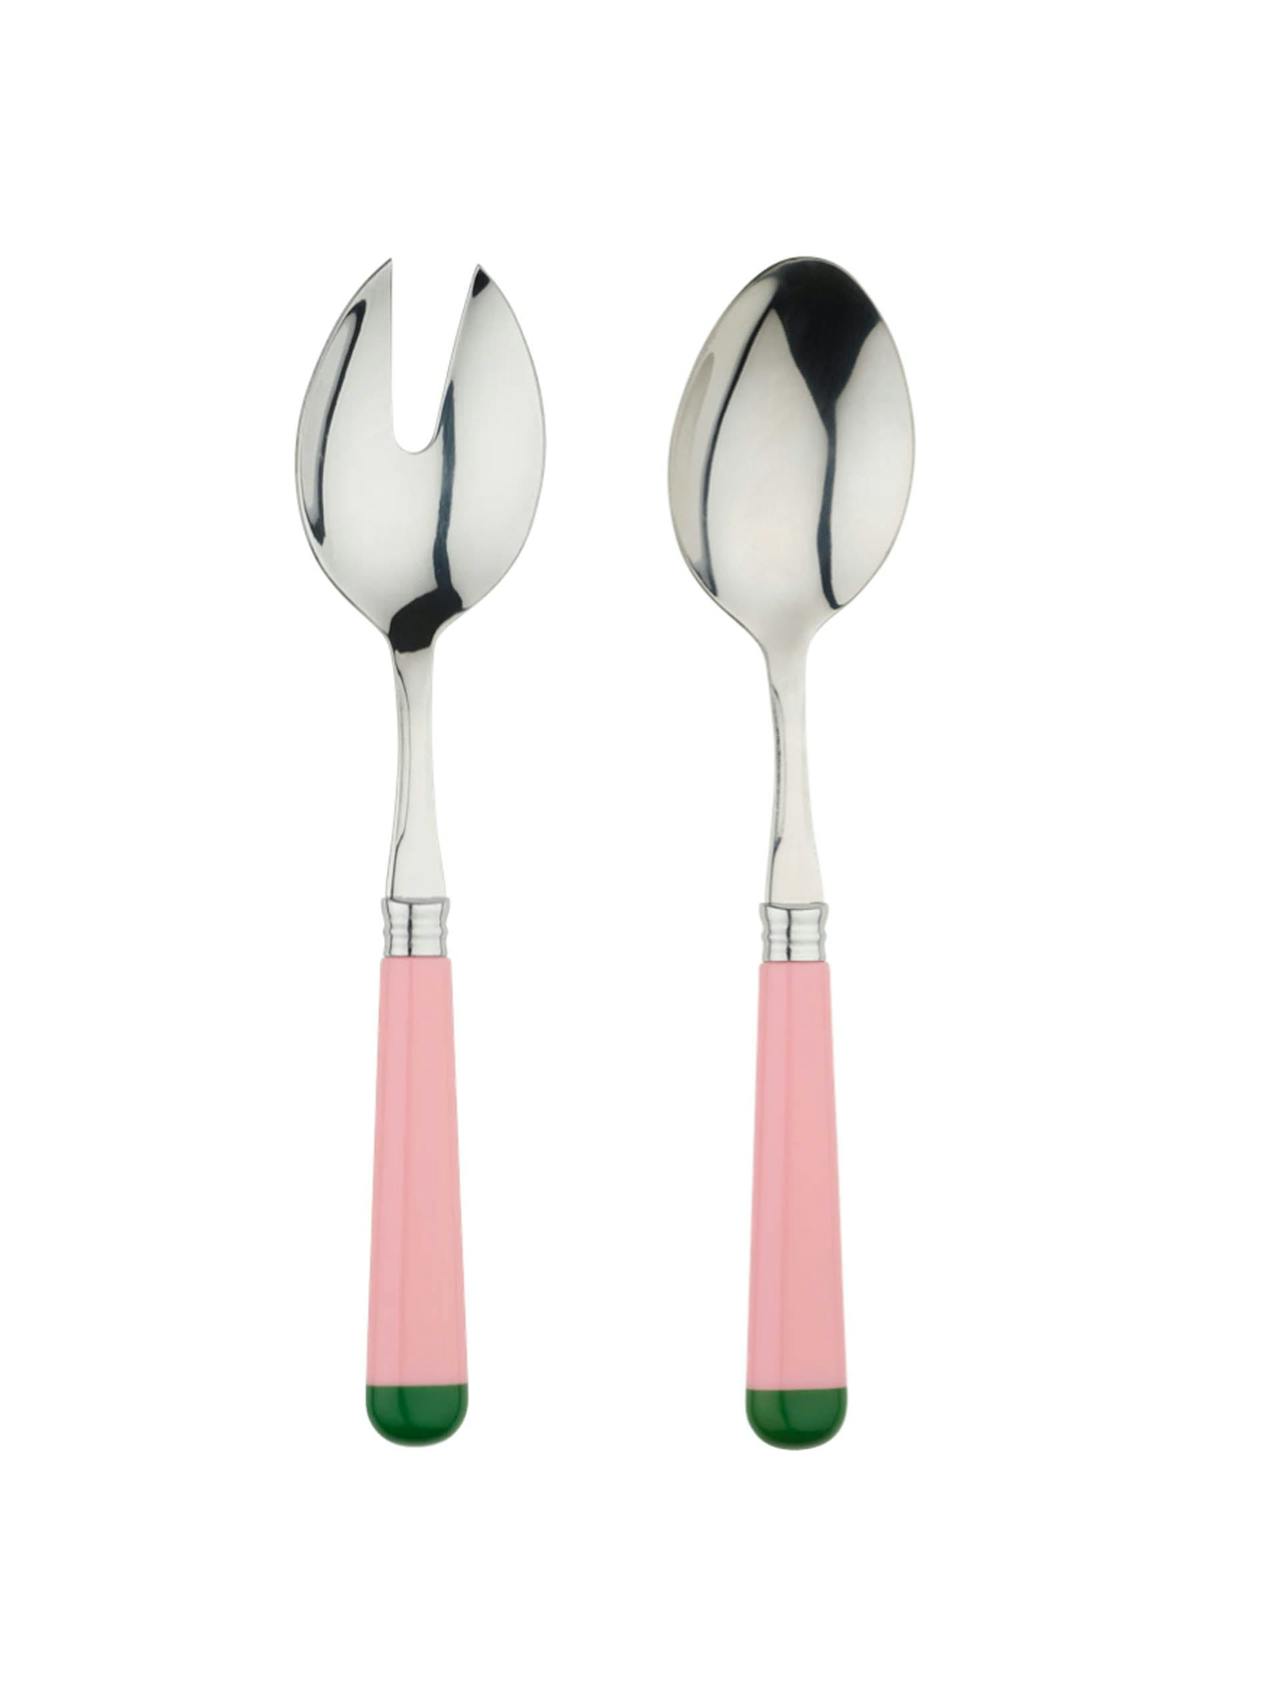 Pink and green salad servers